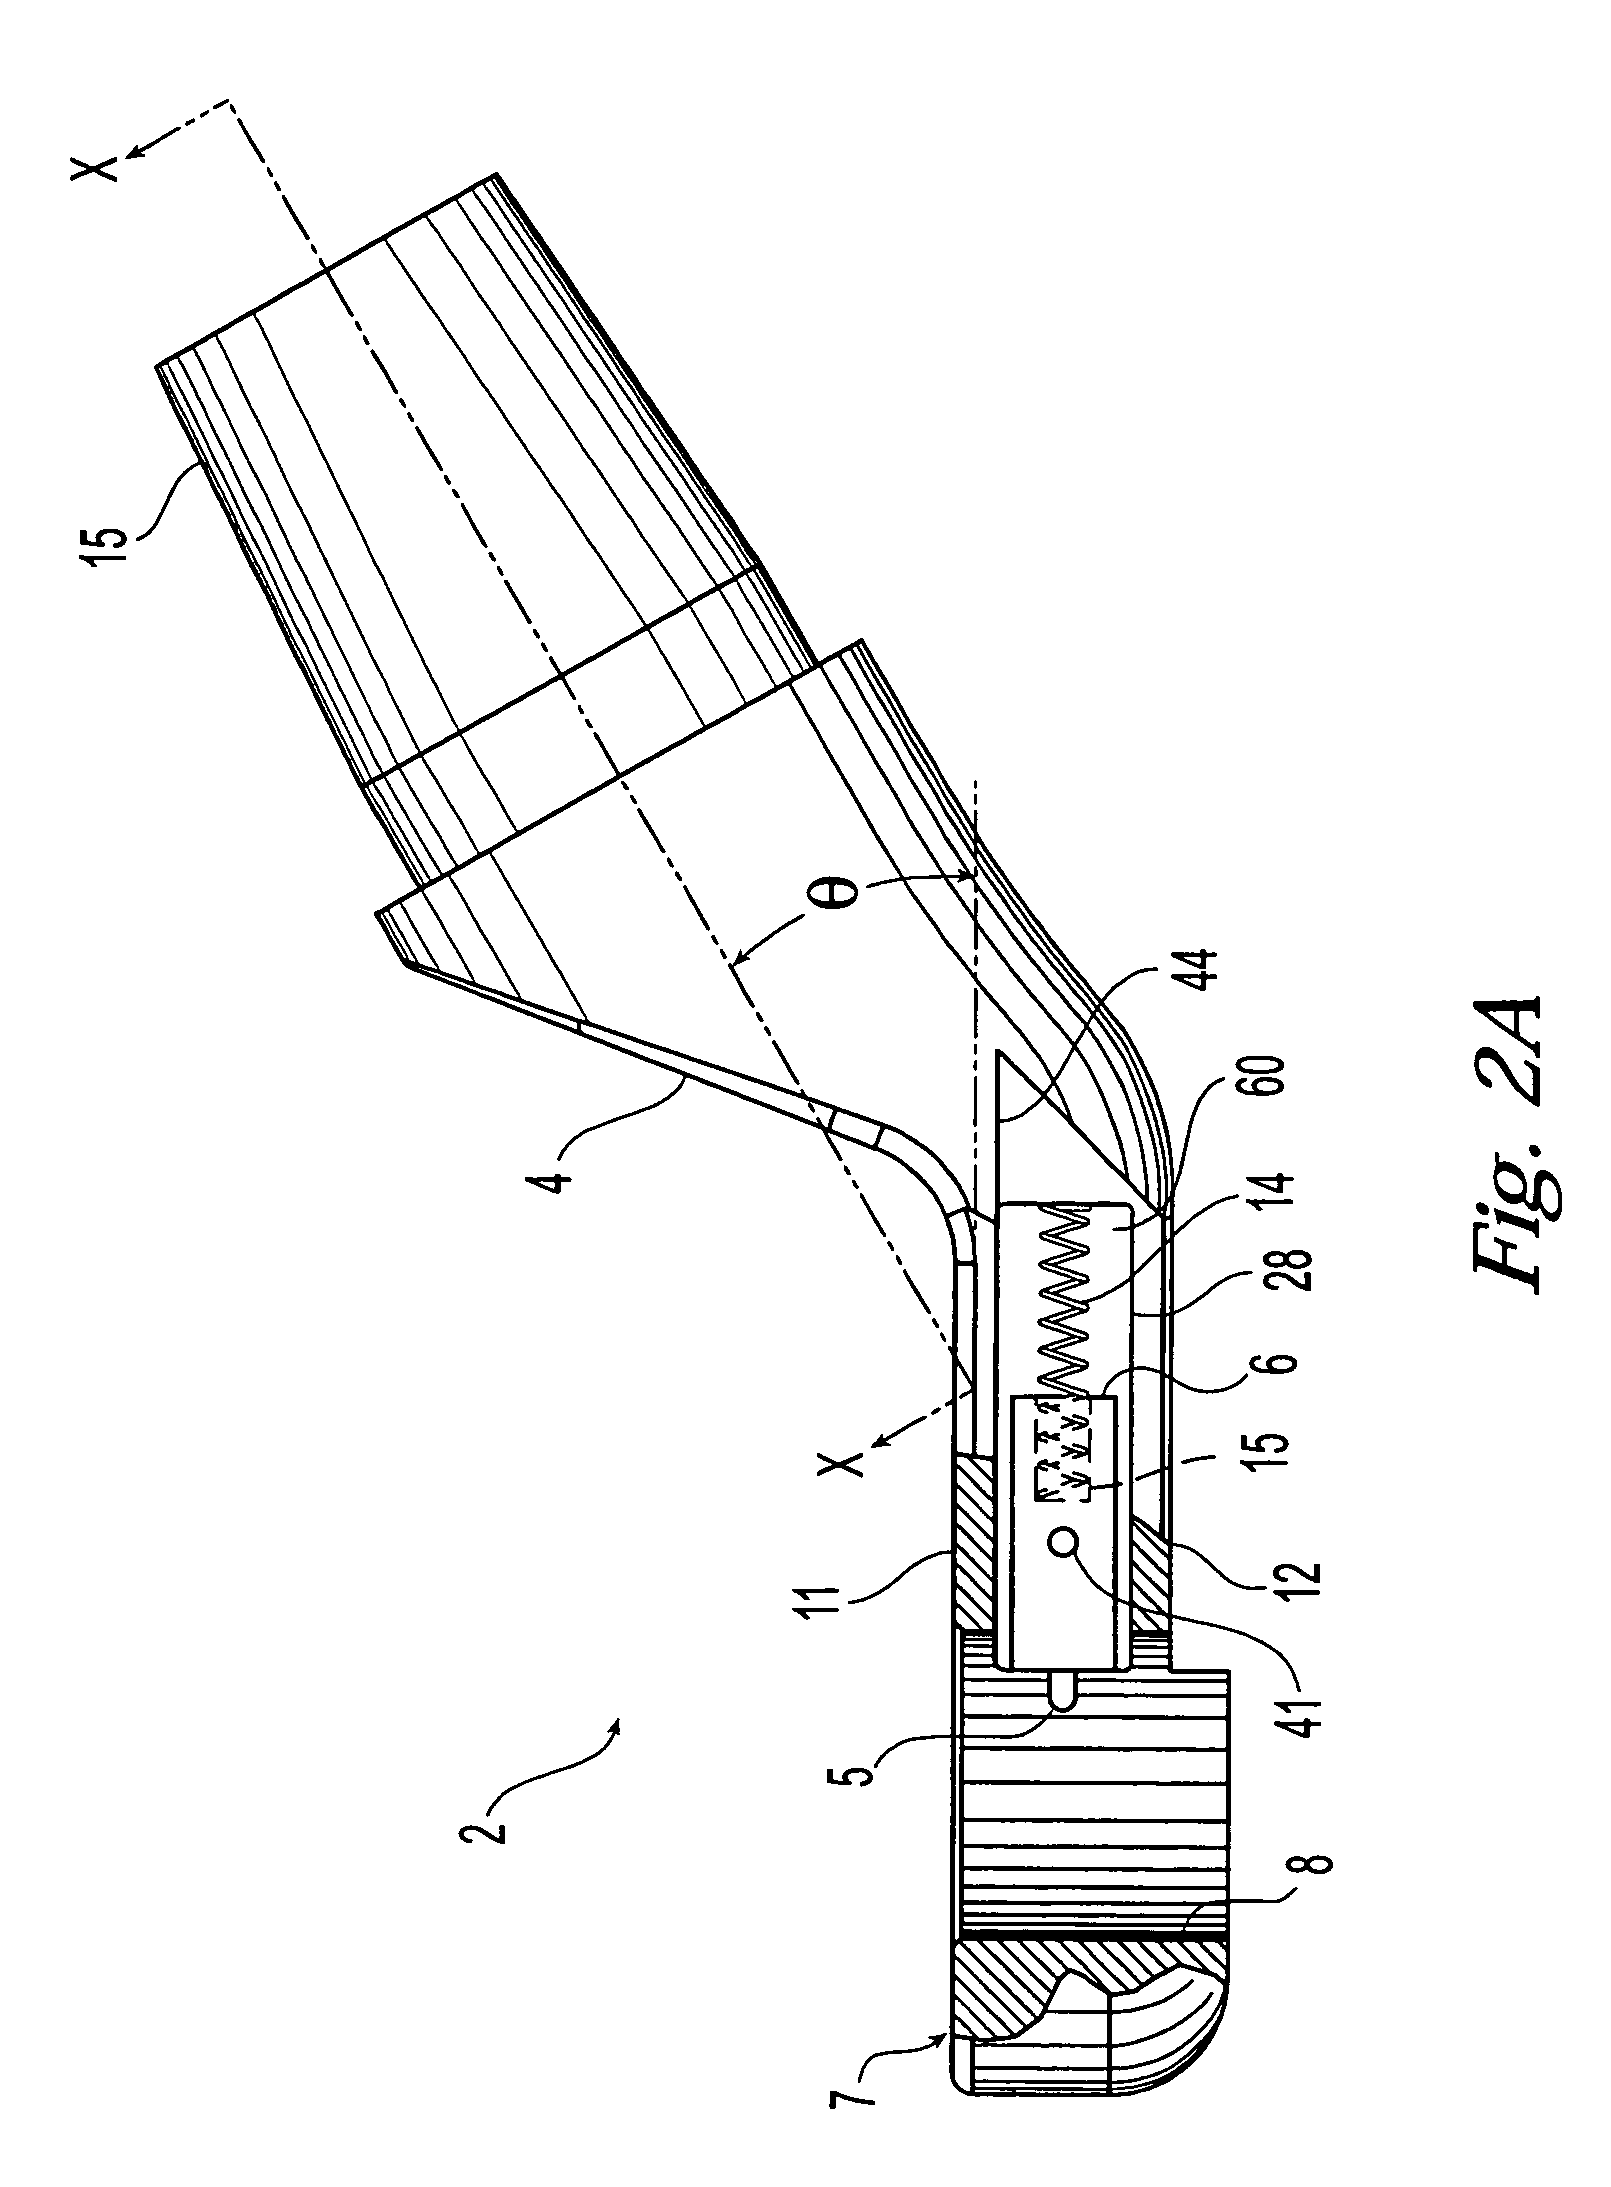 Surgical retractor system